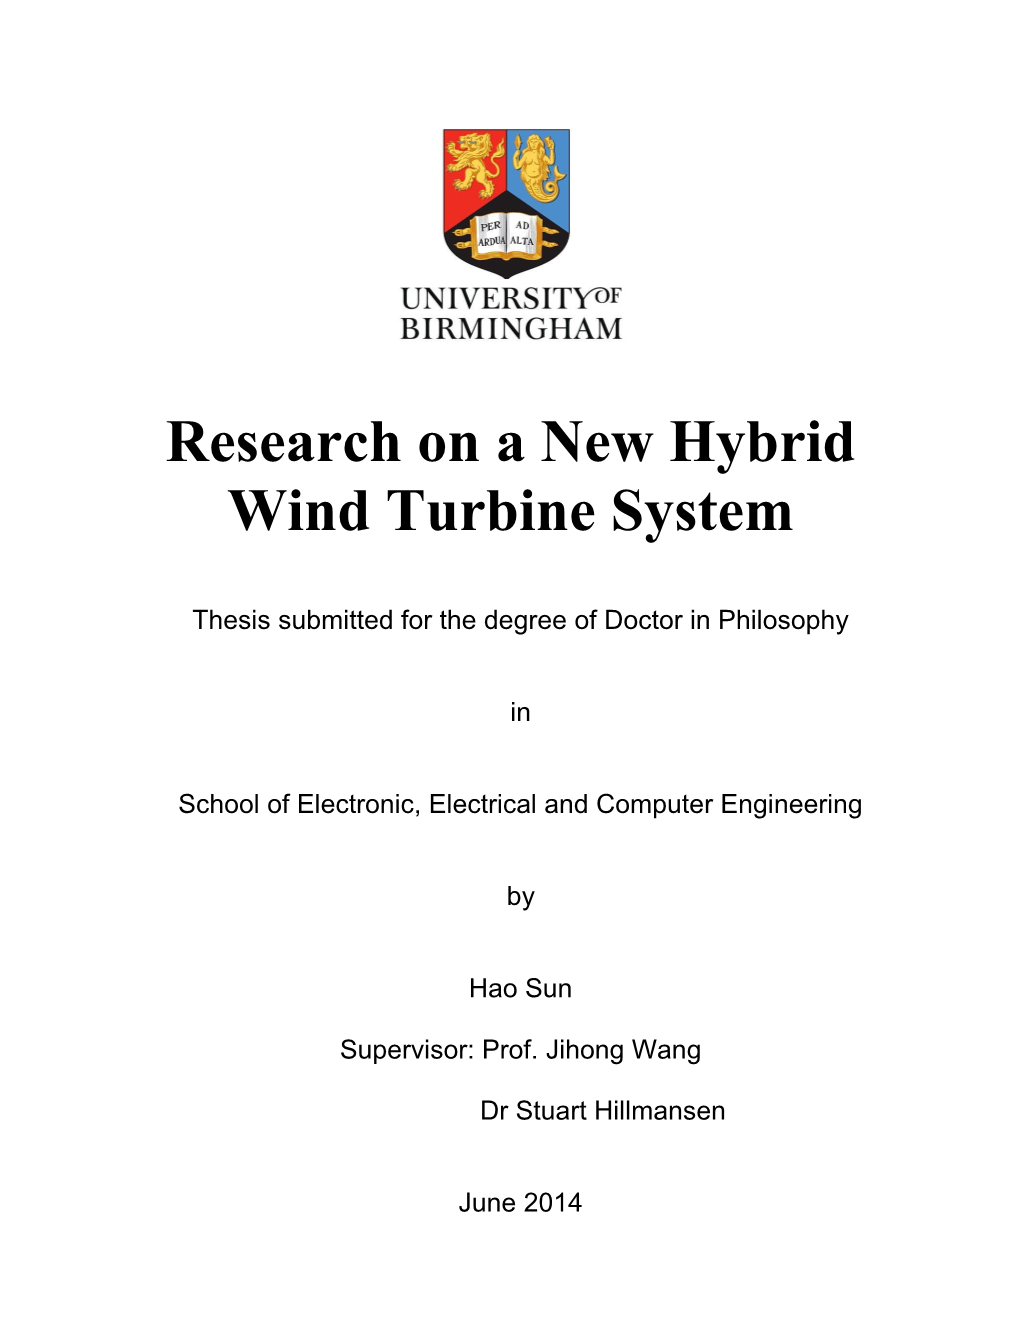 Research on a New Hybrid Wind Turbine System